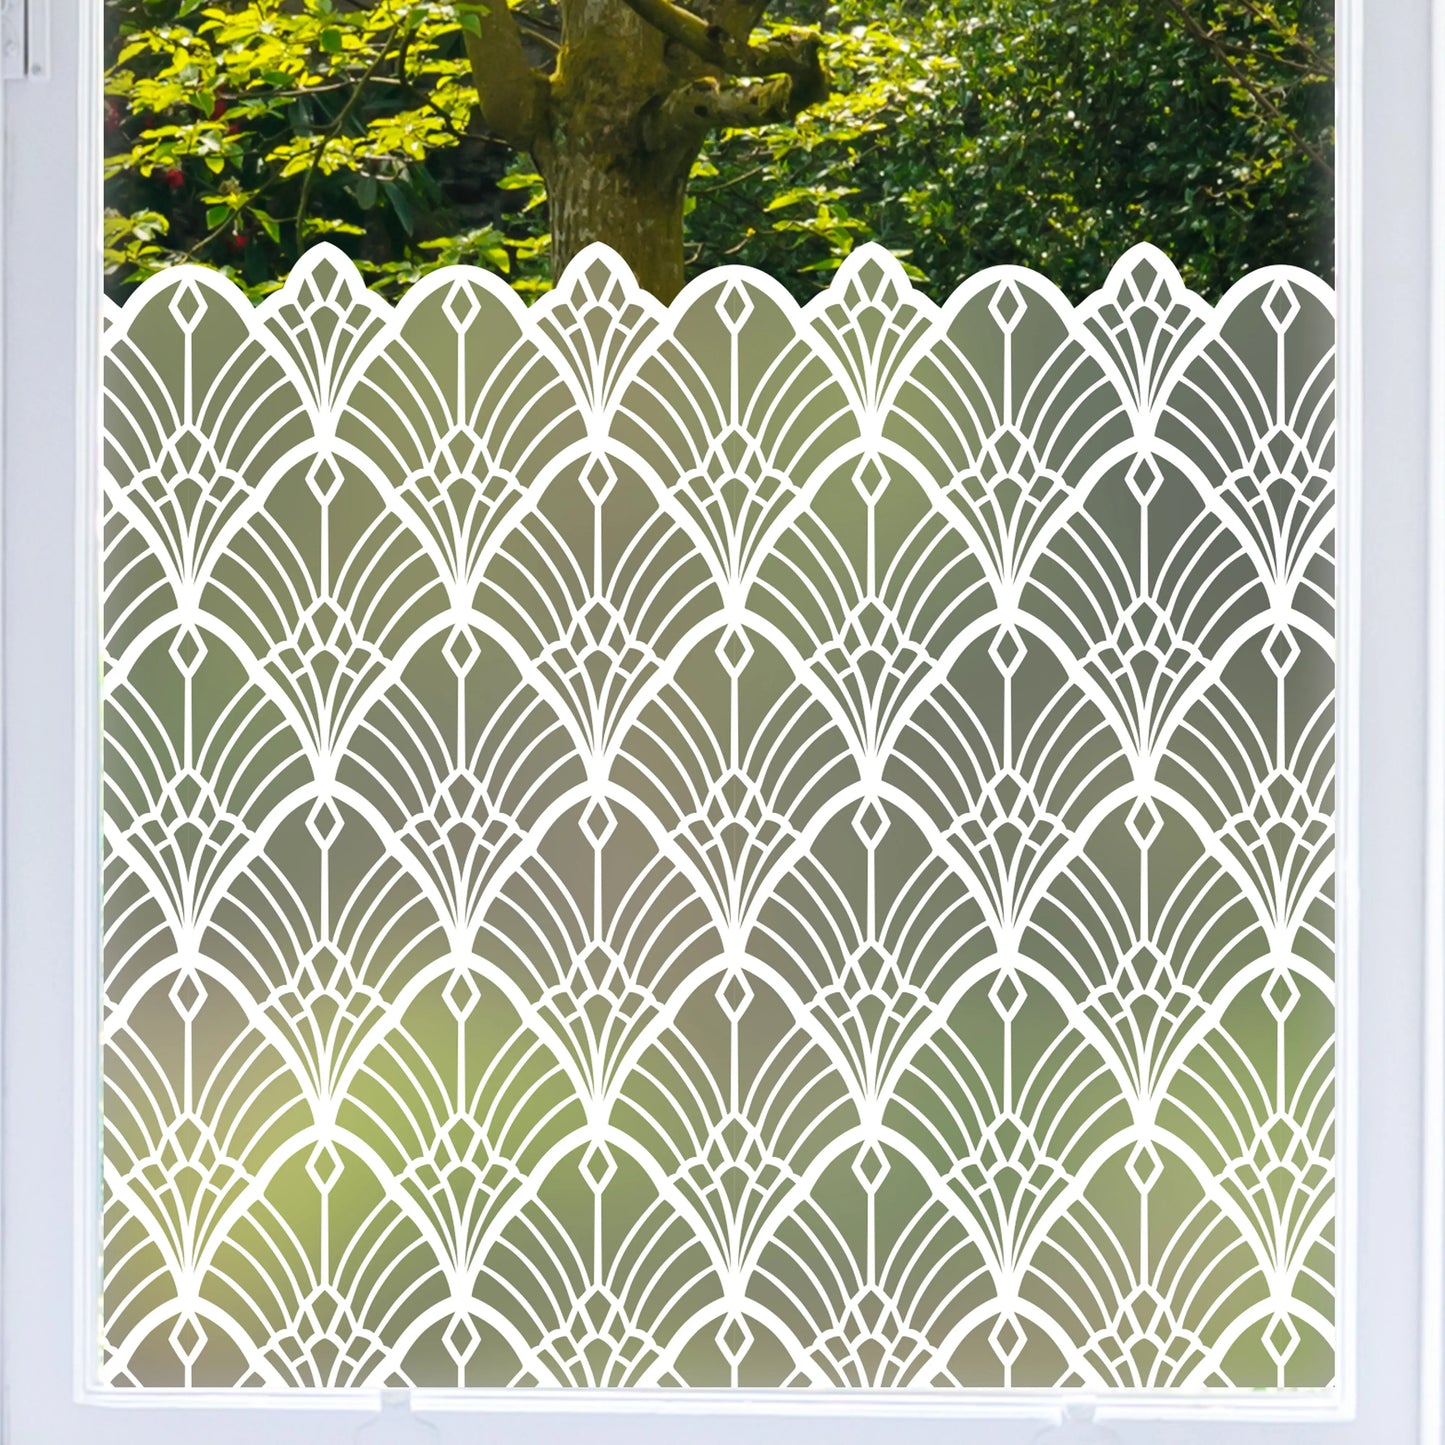  Chicago Frosted Window Privacy Border Dizzy Duck Designs